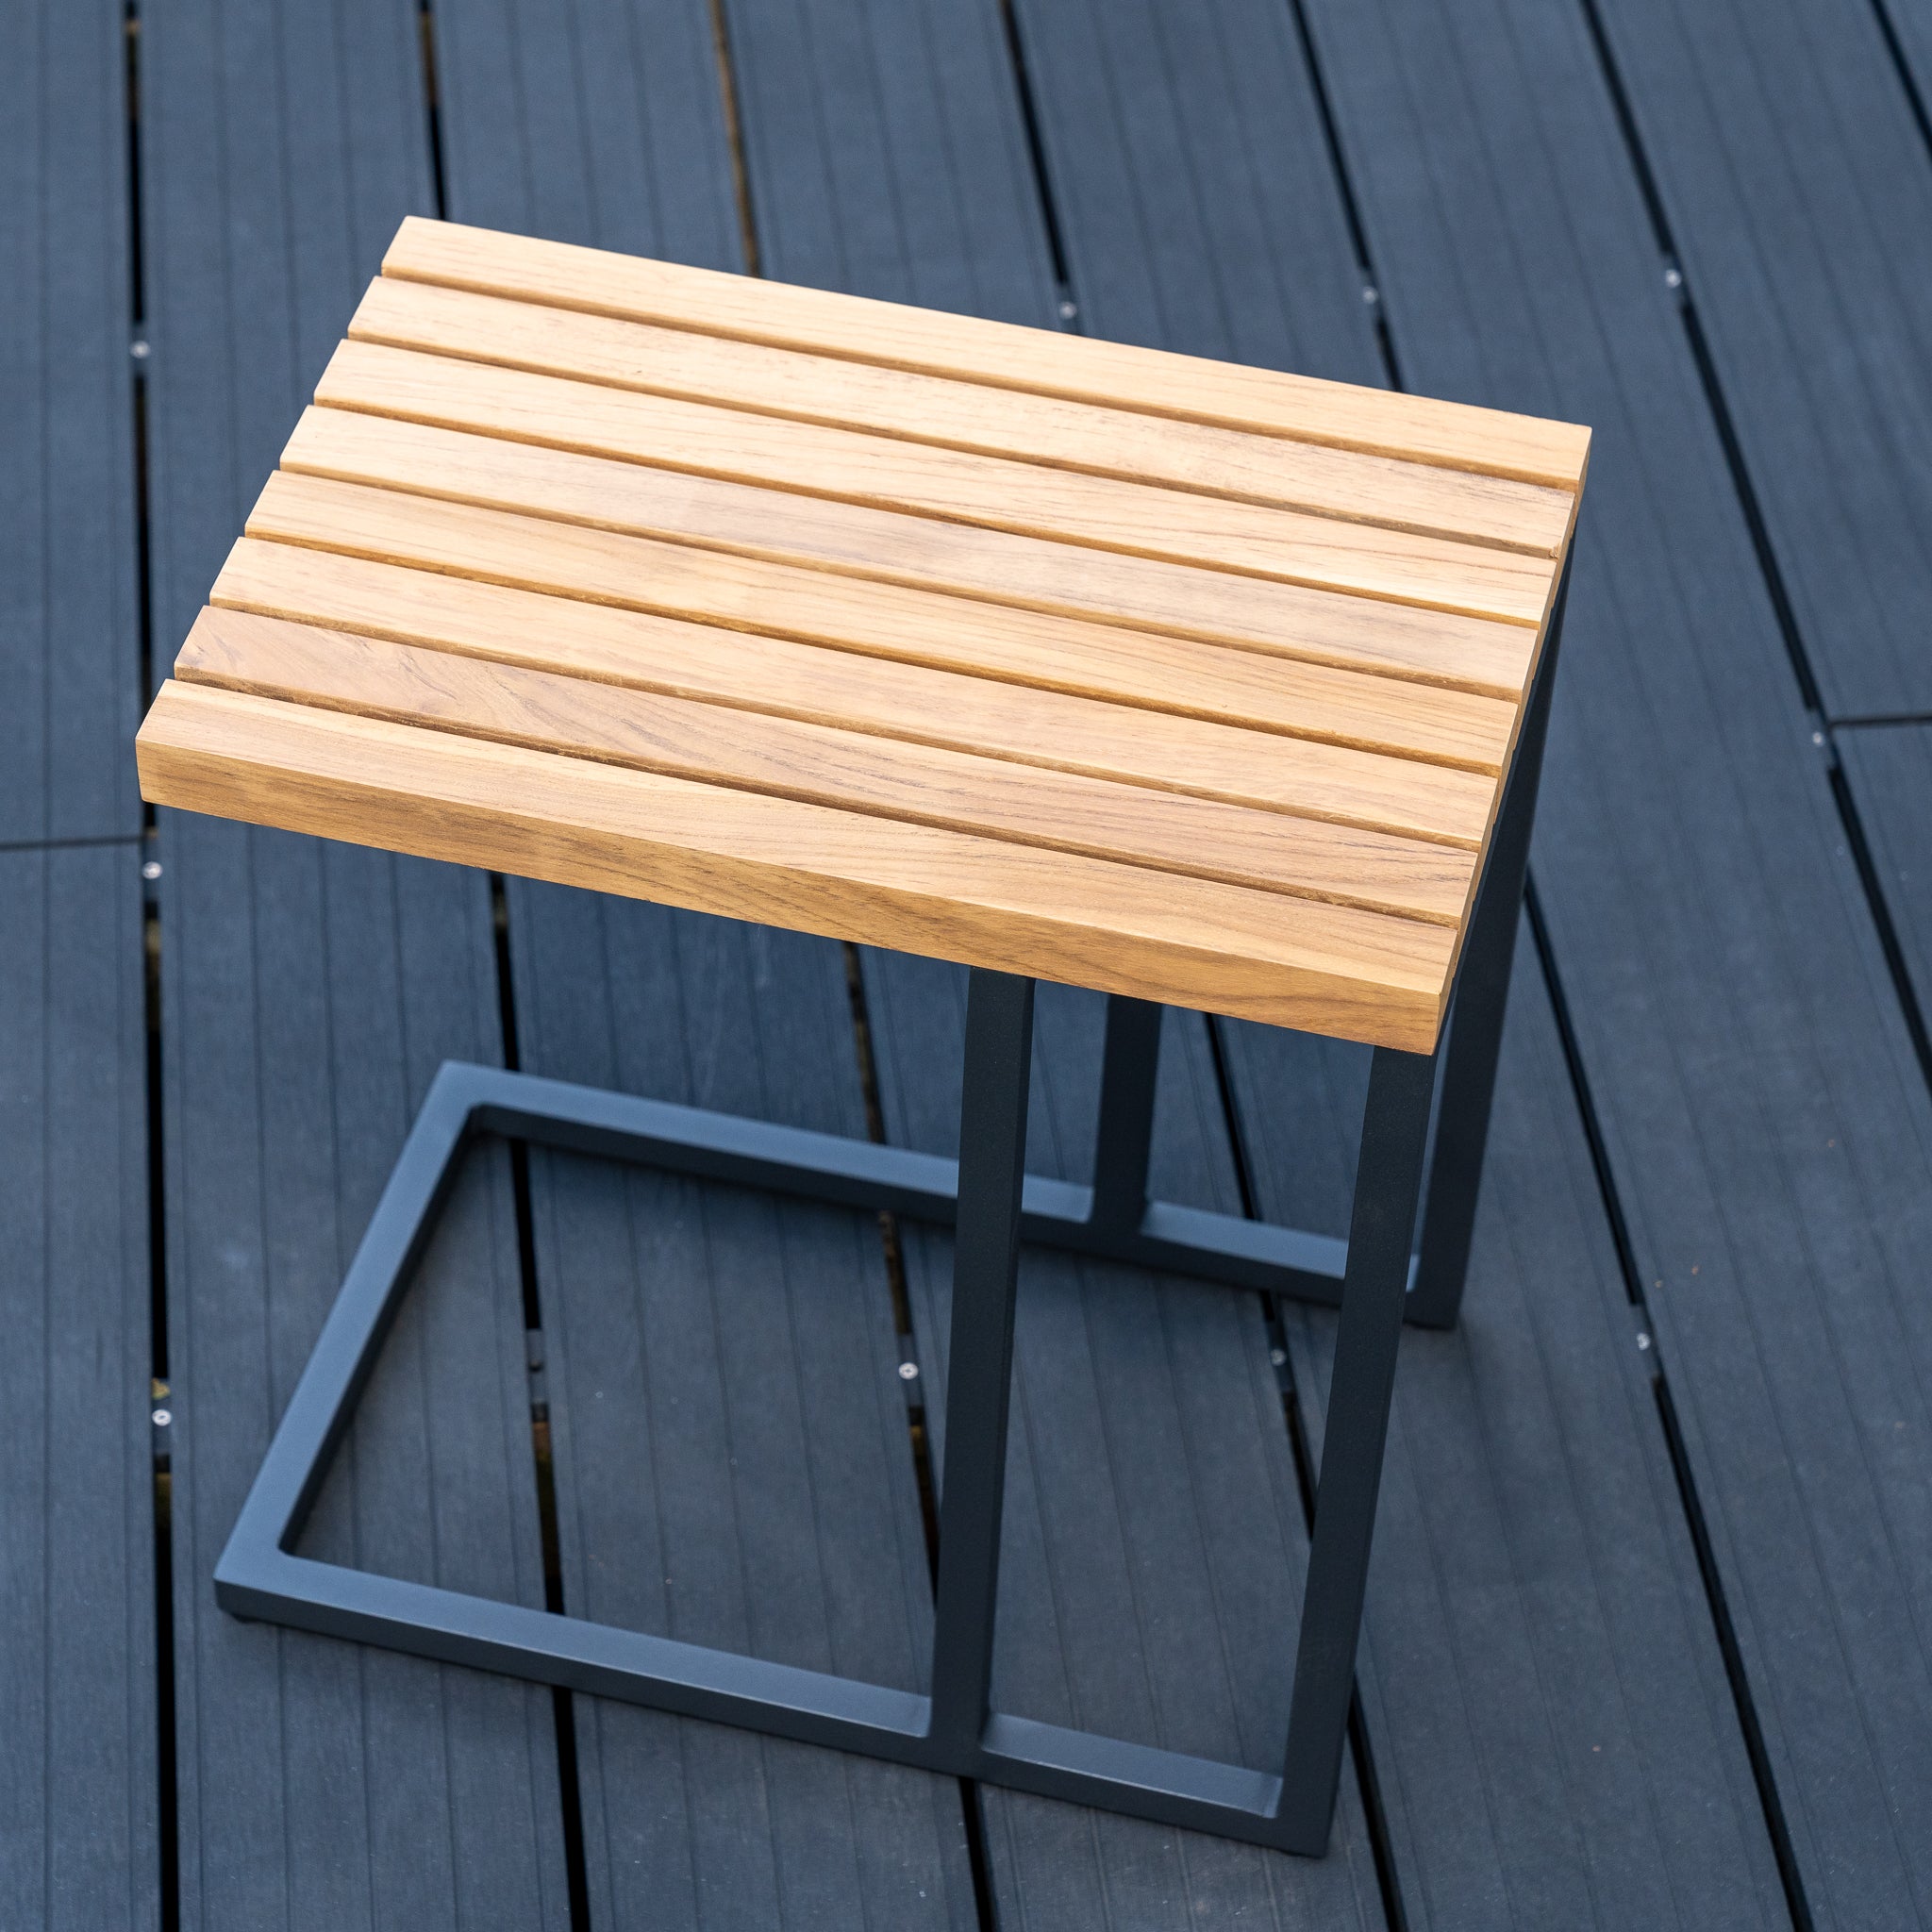 Cube Side Table with Teak Top in Charcoal